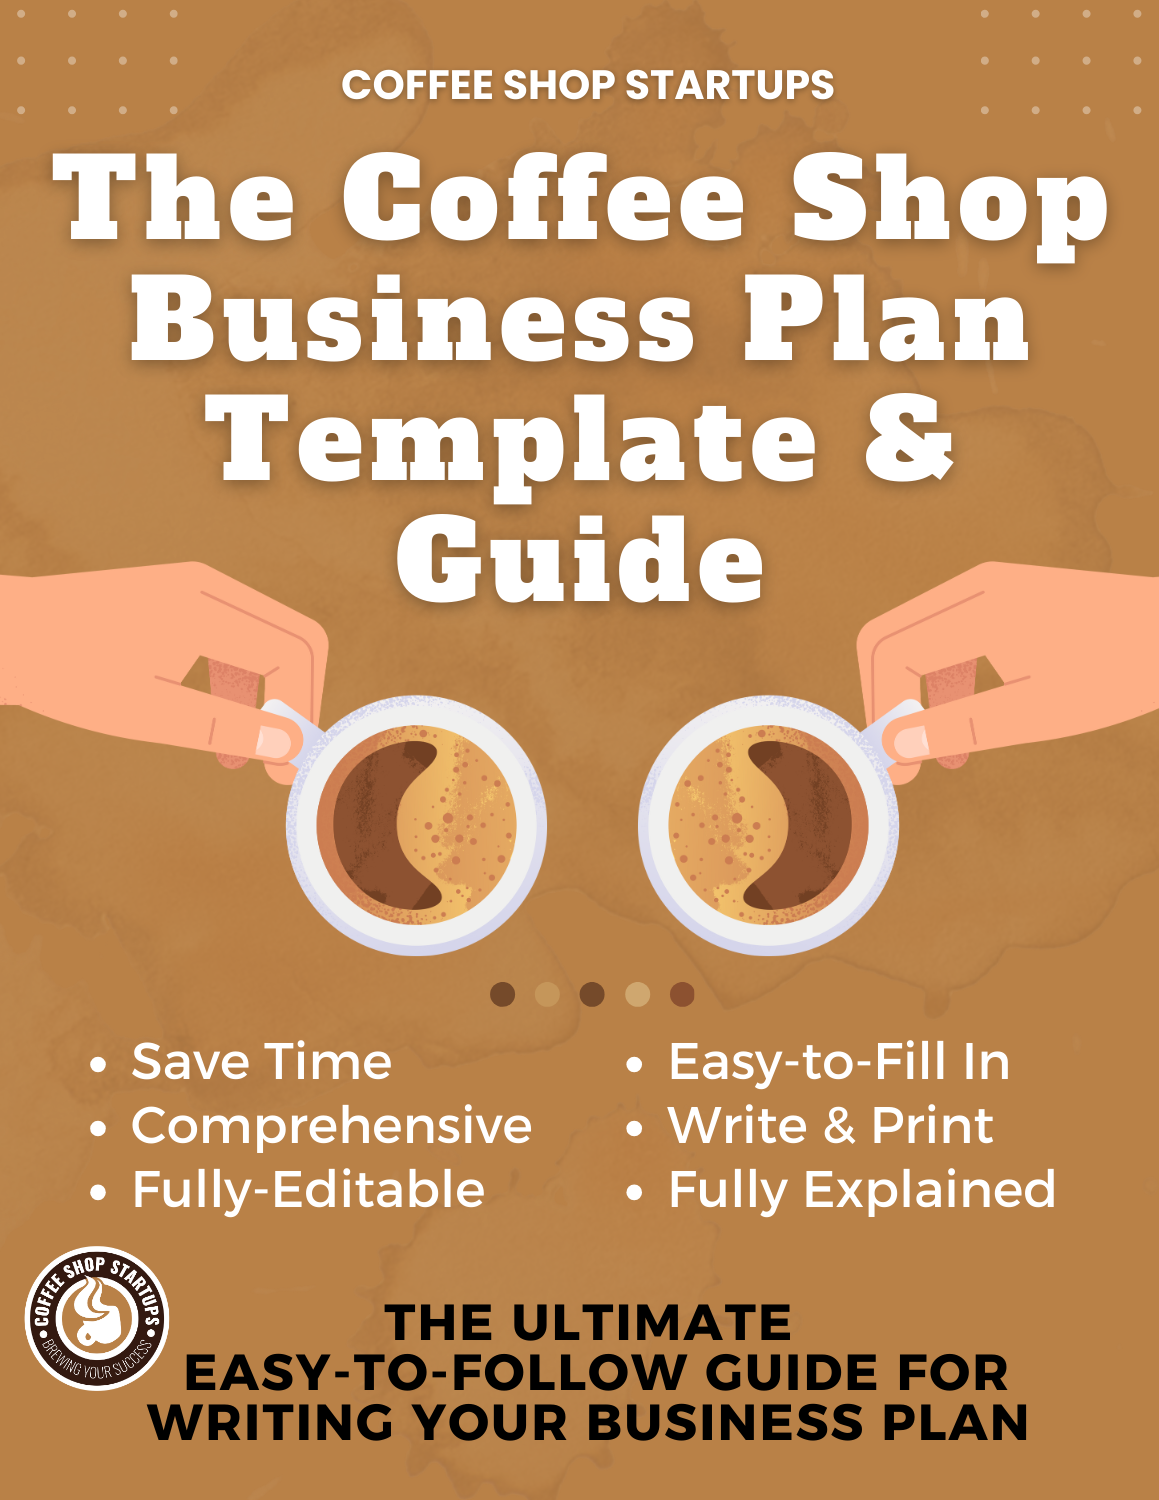 The Coffee Shop Business Plan Template & Guide